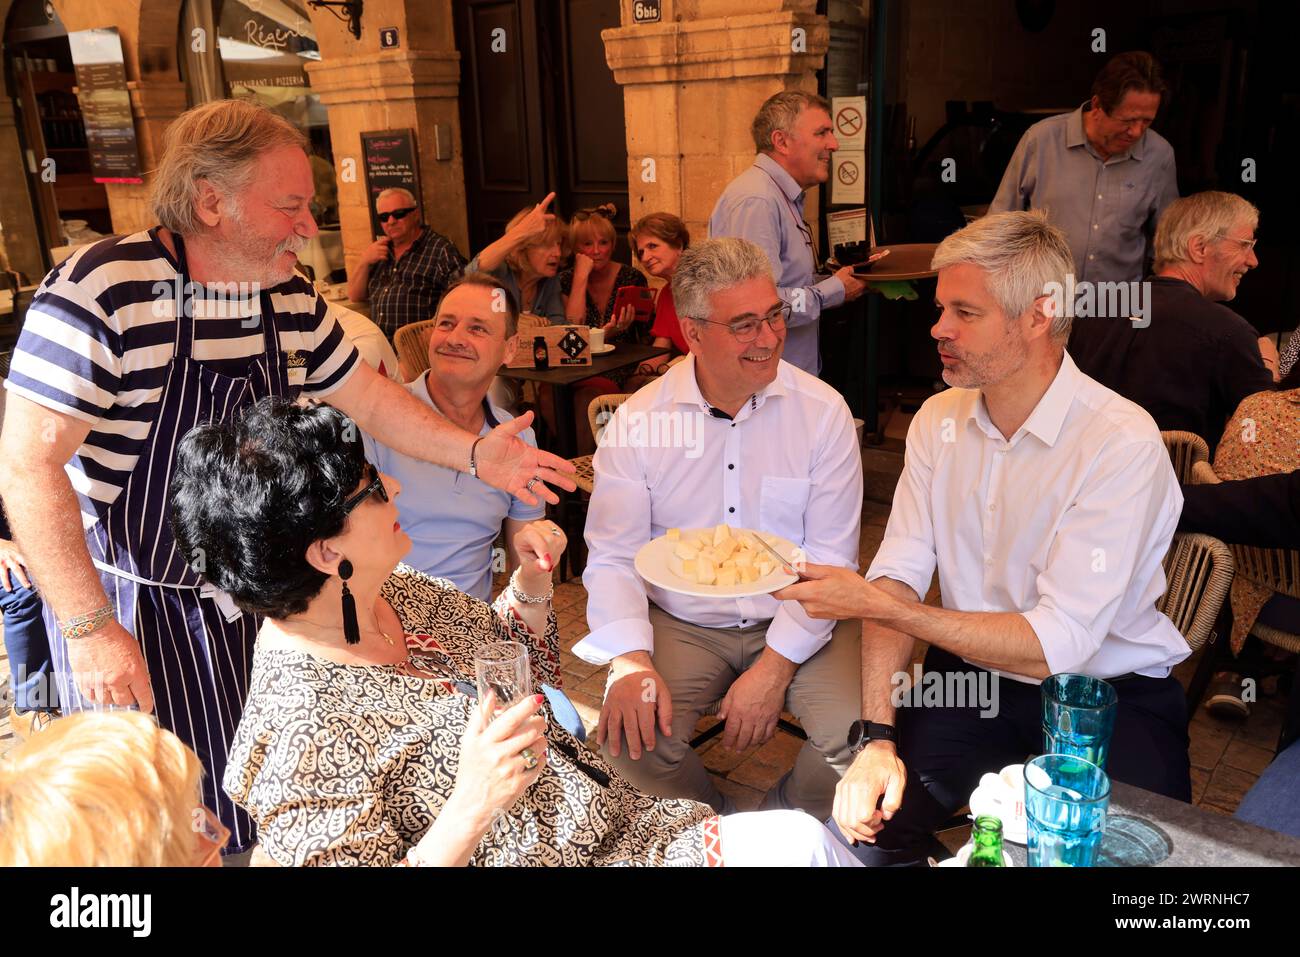 Laurent Wauquiez, French politician “Les Républicains”, during the legislative election campaign in Sarlat in Périgord noir in support of the local c Stock Photo